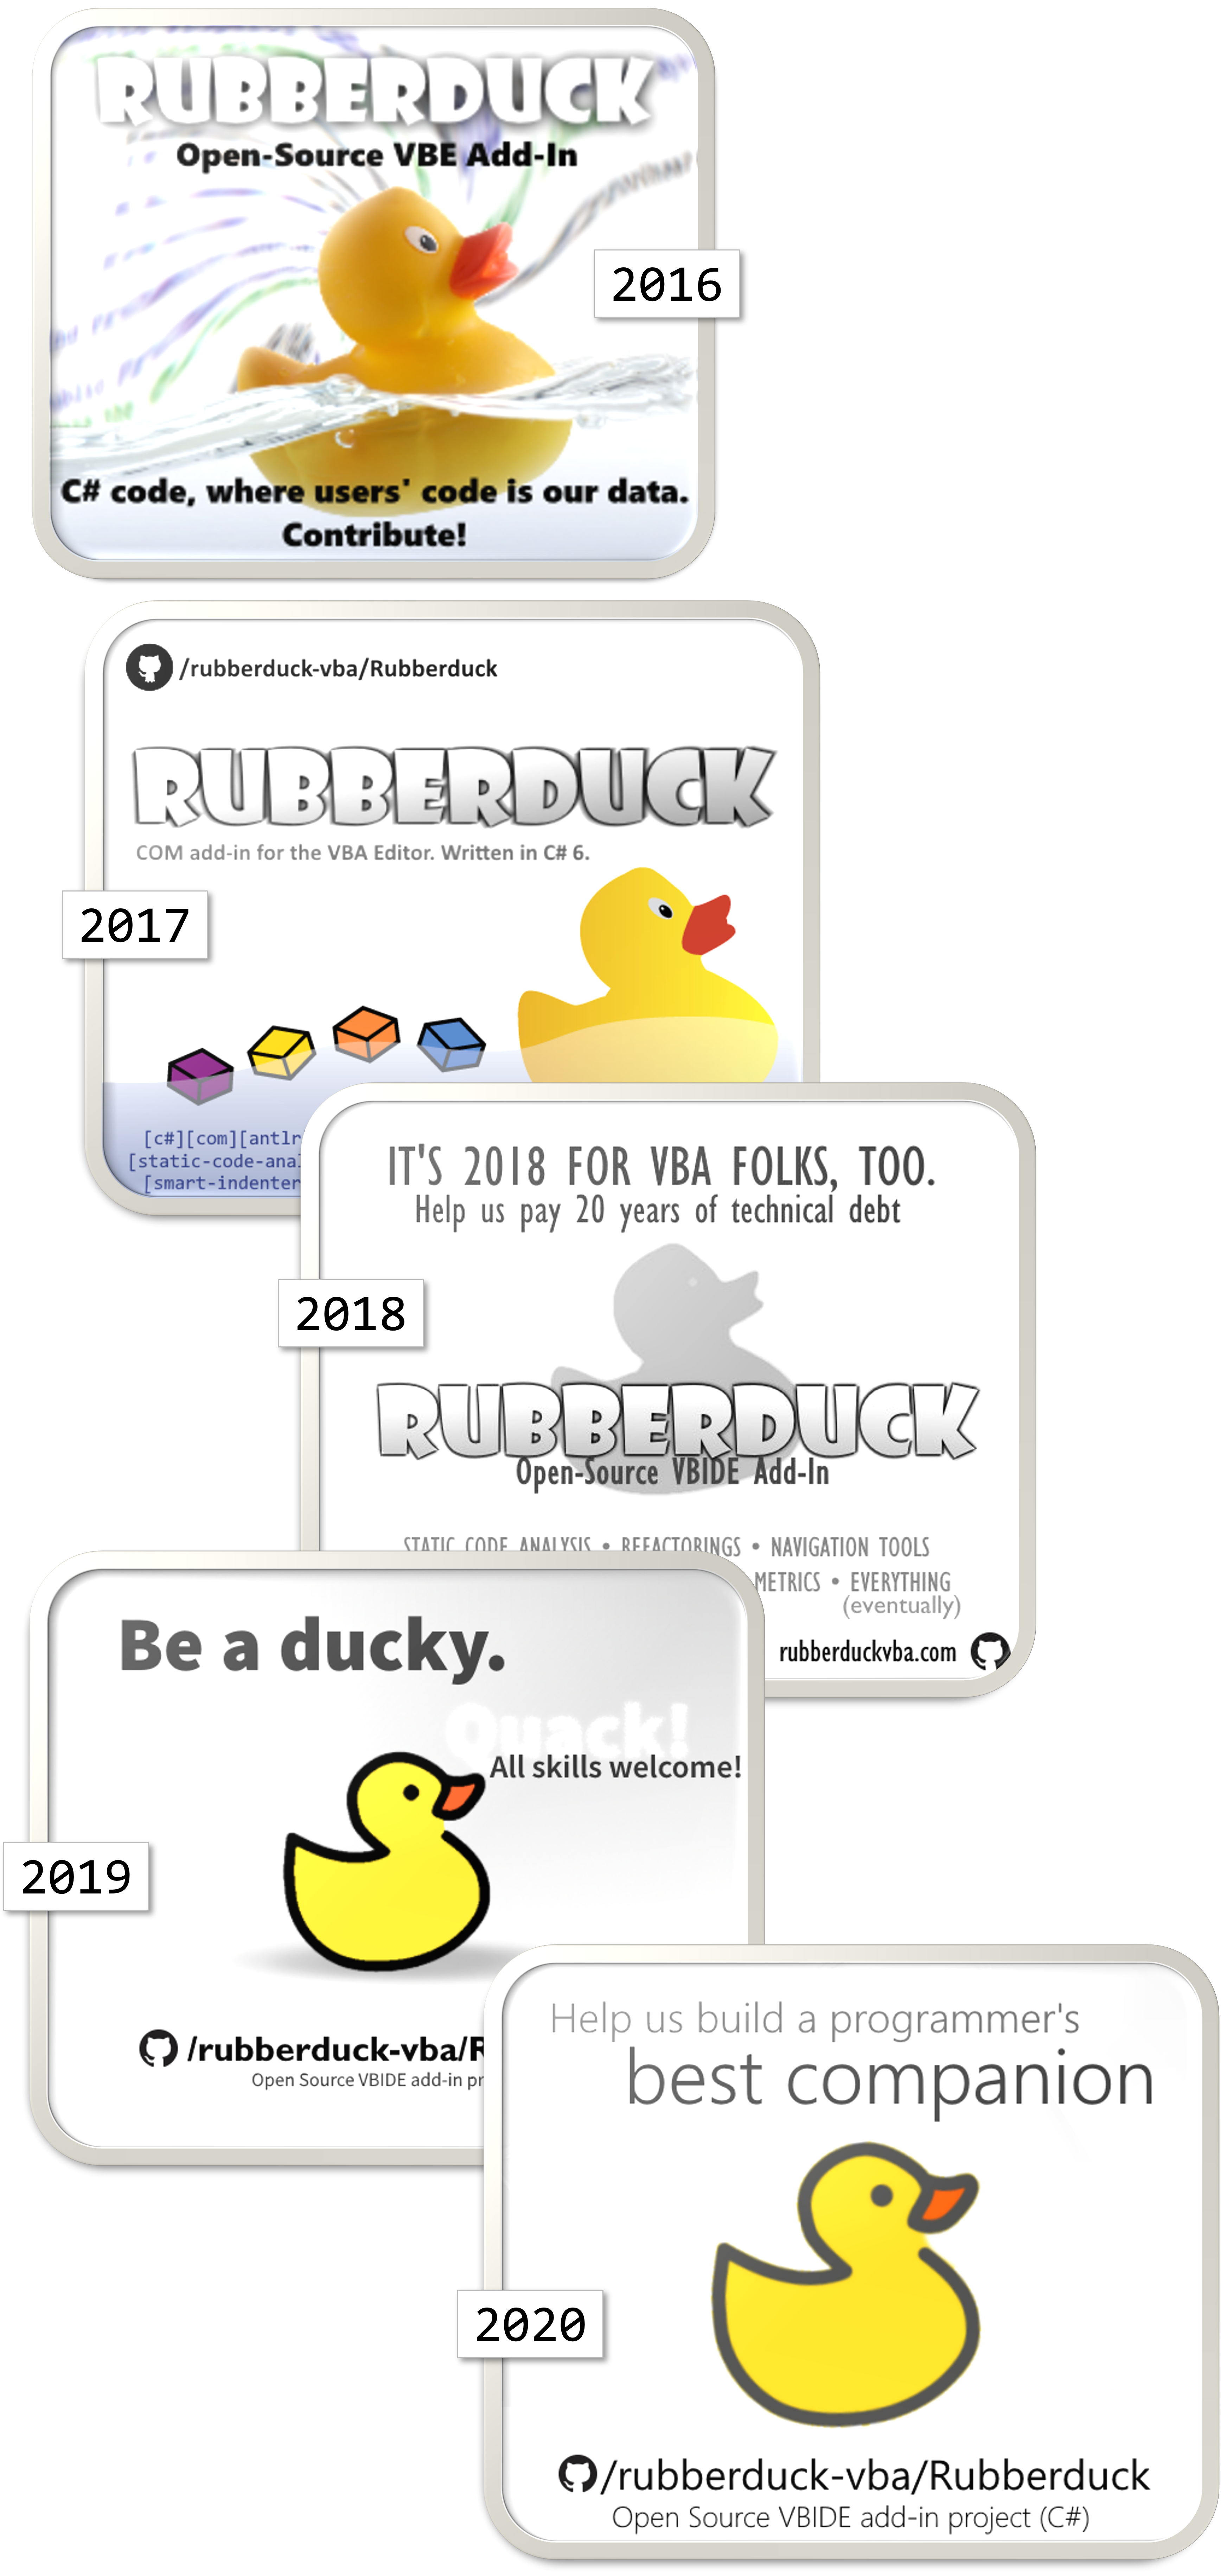 Rubberduck ads published on Meta Stack Overflow over the years